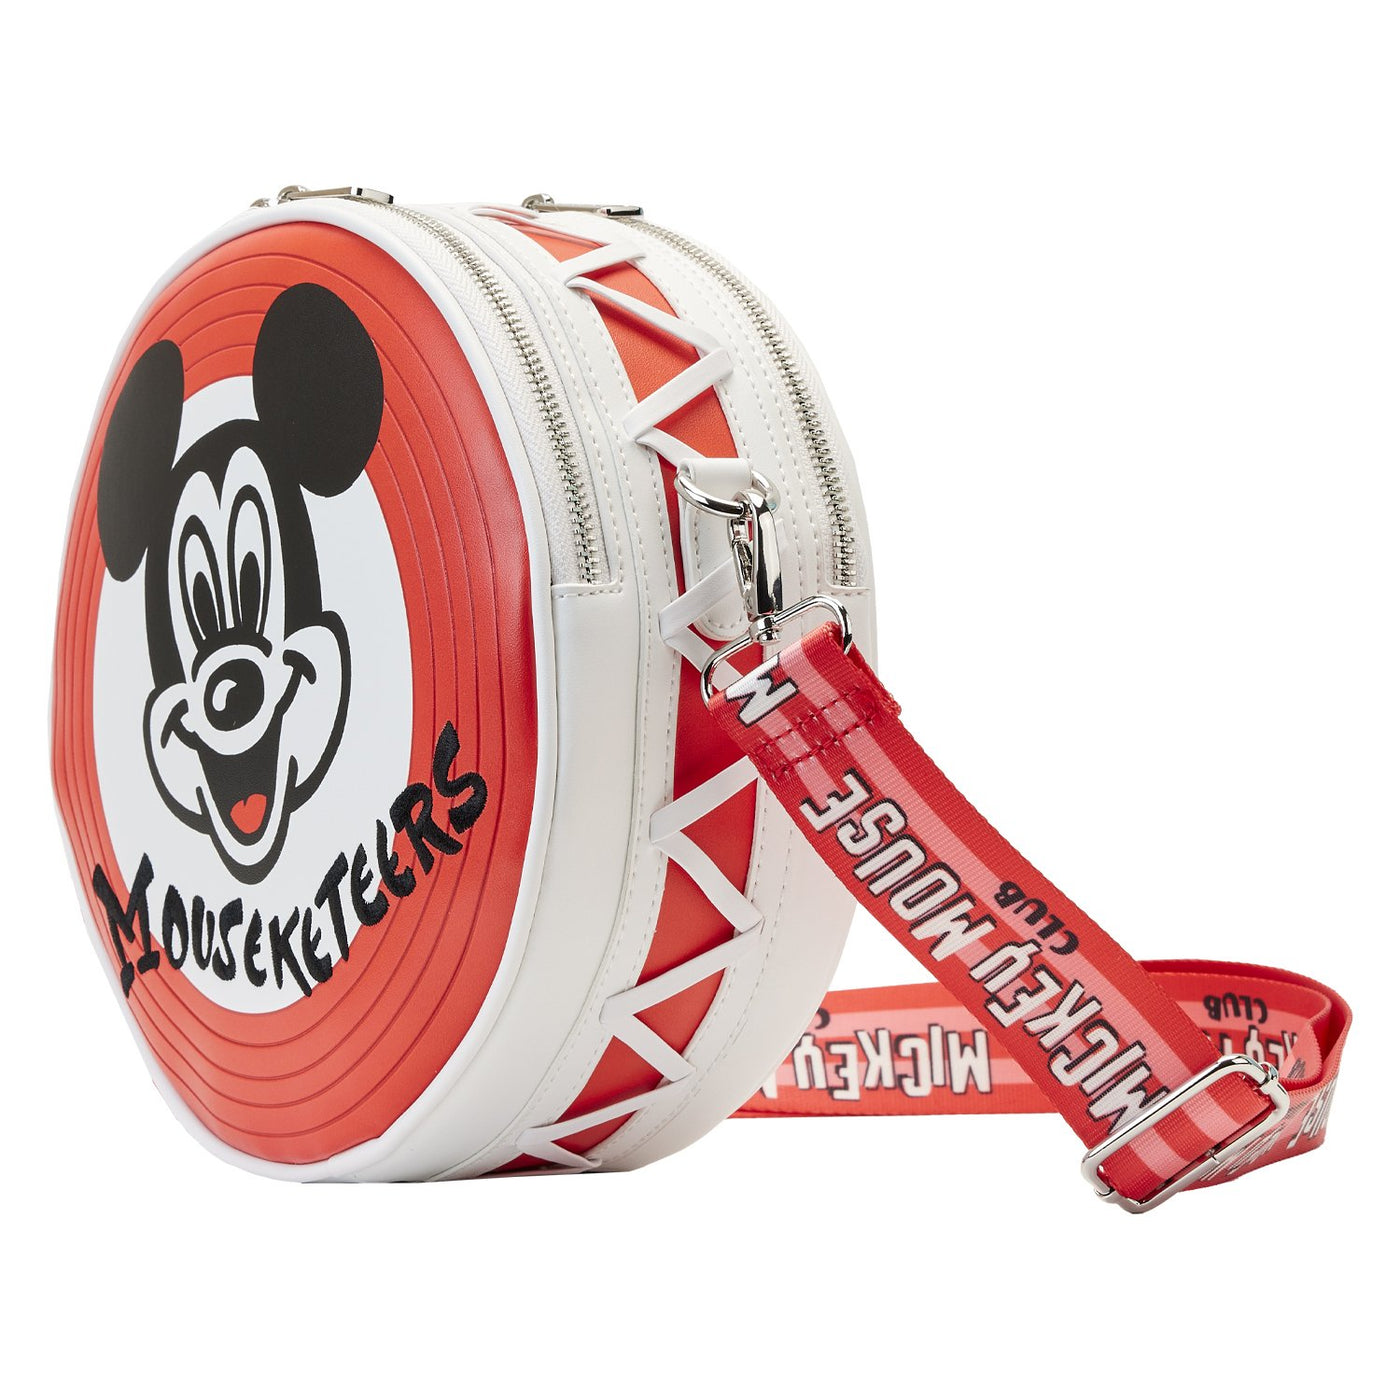 671803452053 - Loungefly Disney 100th Mickey Mouseketeers Ear Holder Crossbody - Side View